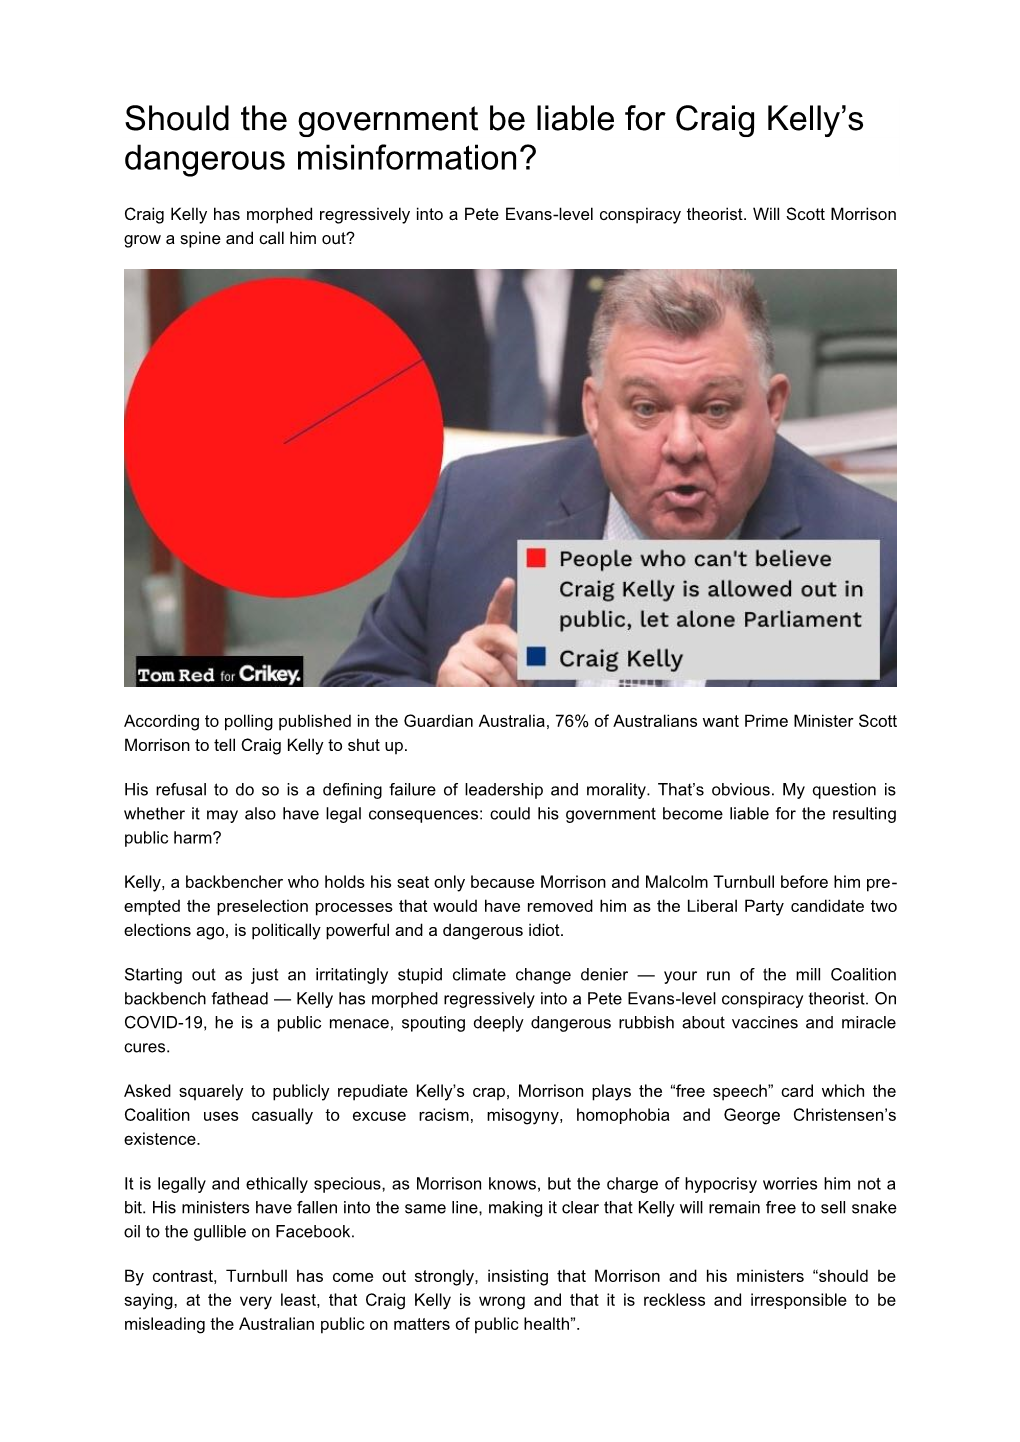 Should the Government Be Liable for Craig Kelly's Dangerous